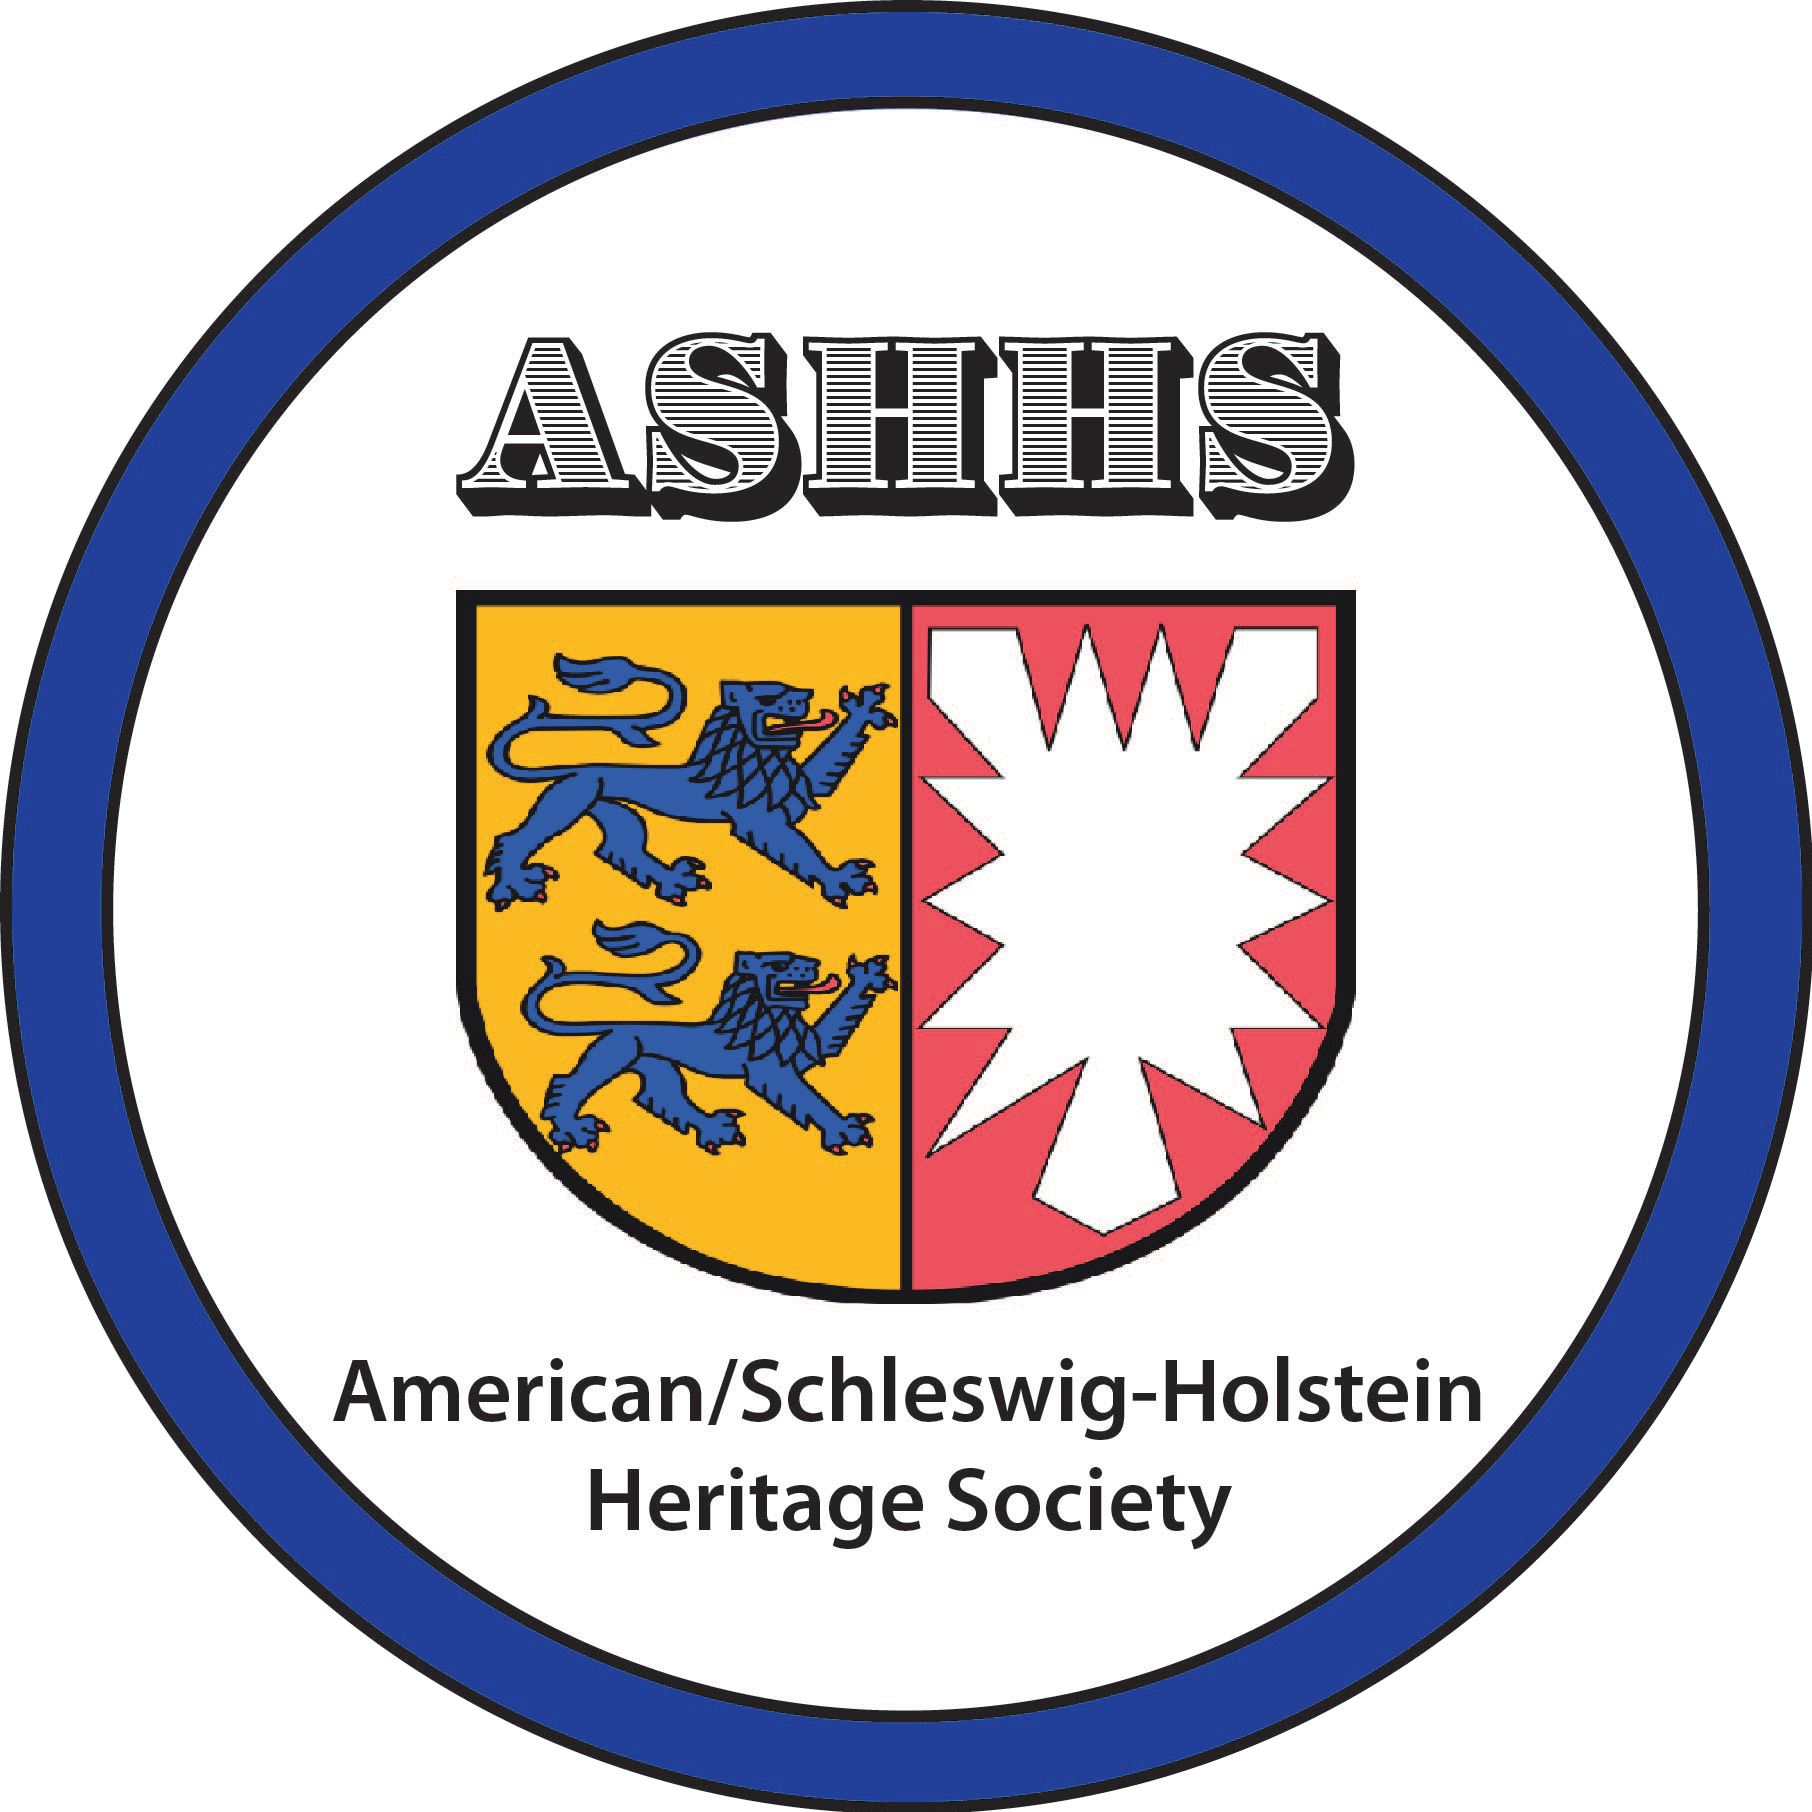 Preserving and promoting the heritage of Schleswig-Holstein in the U.S.